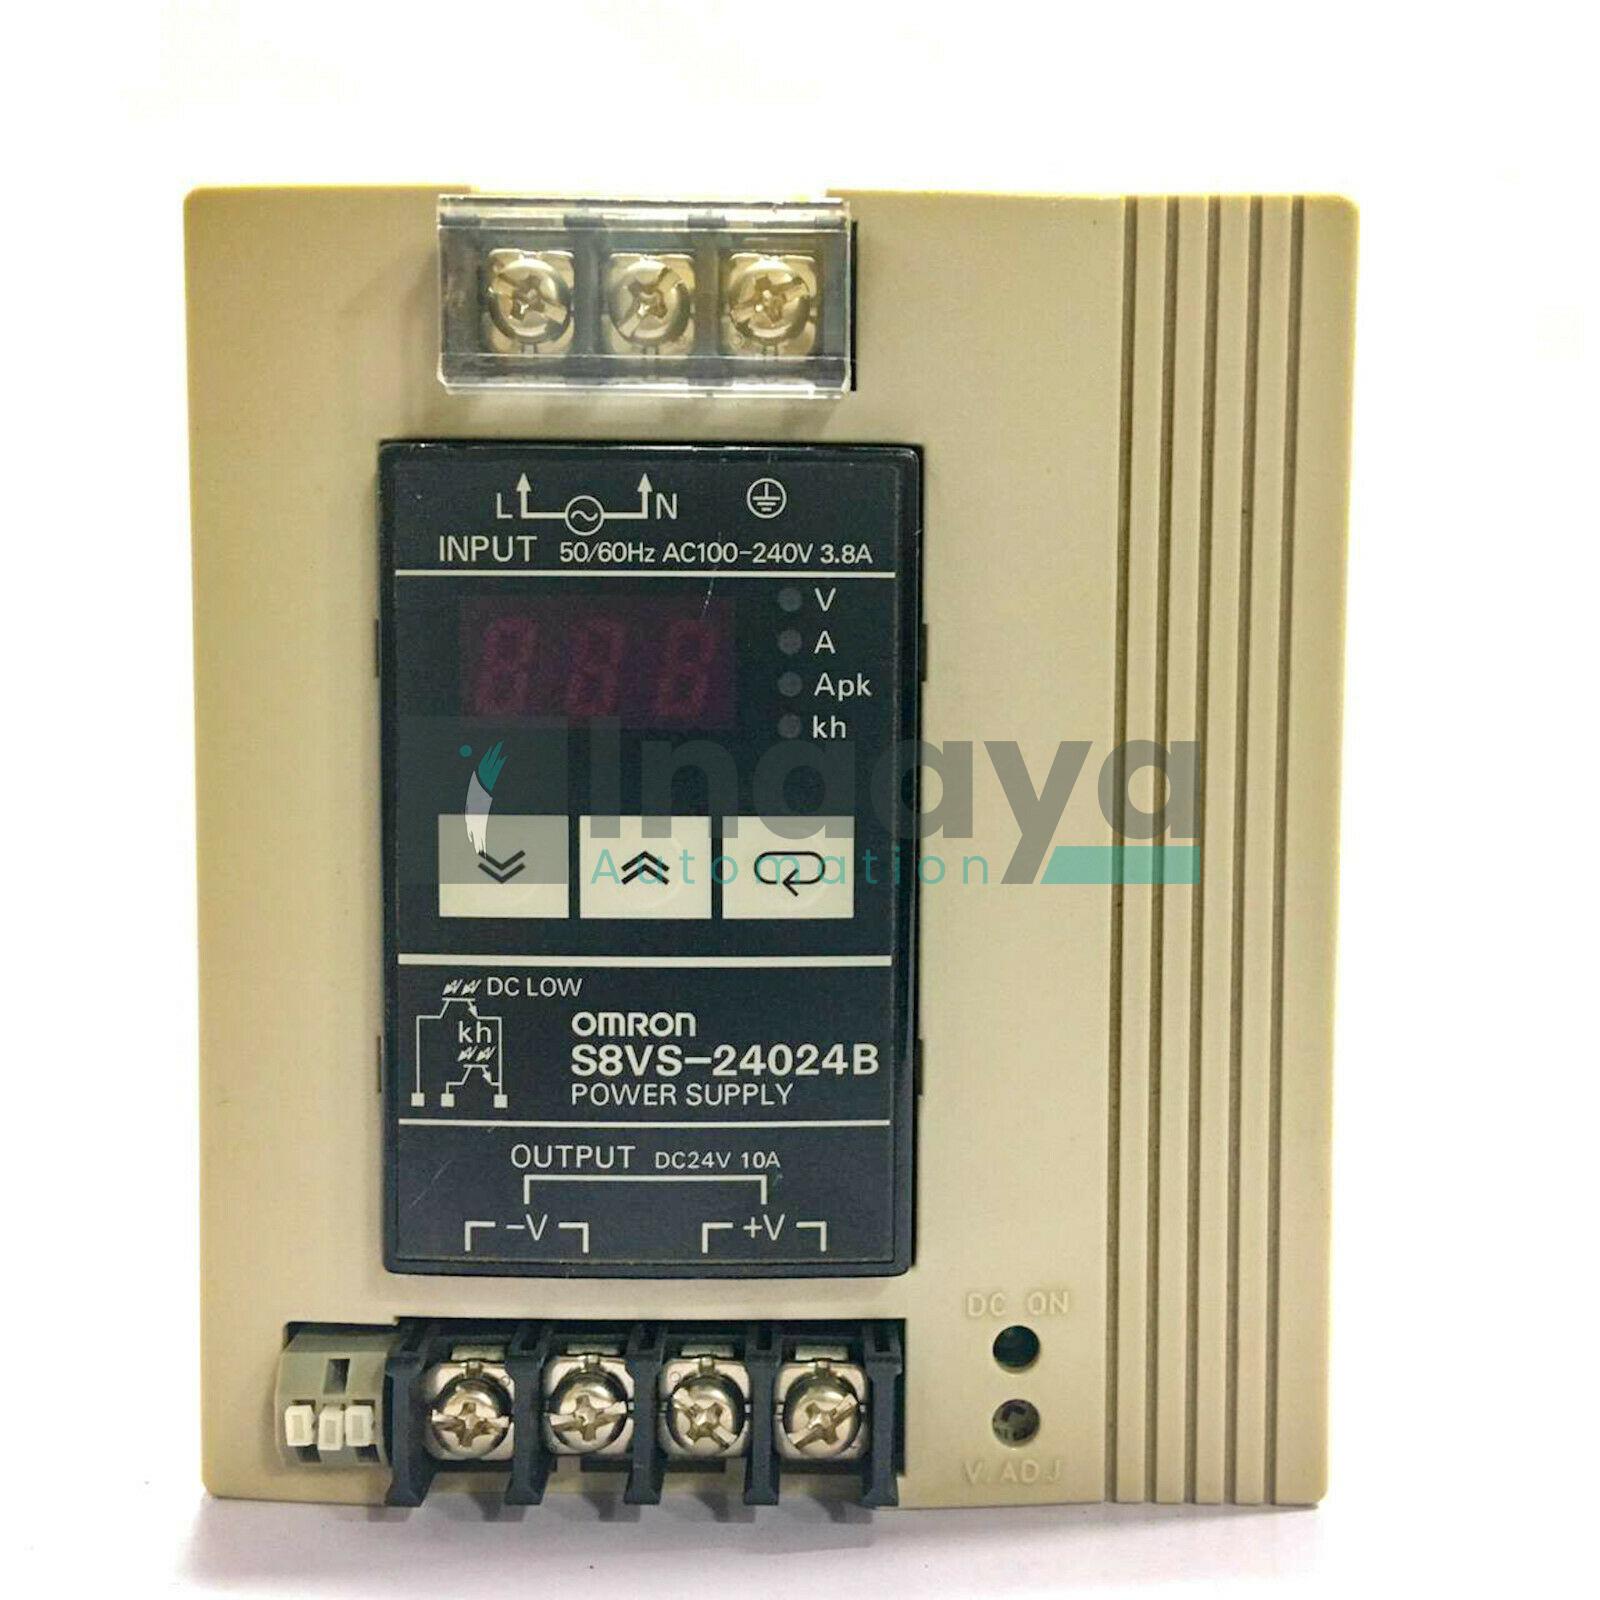 OMRON S8VS-24024B AC TO DC POWER SUPPLY